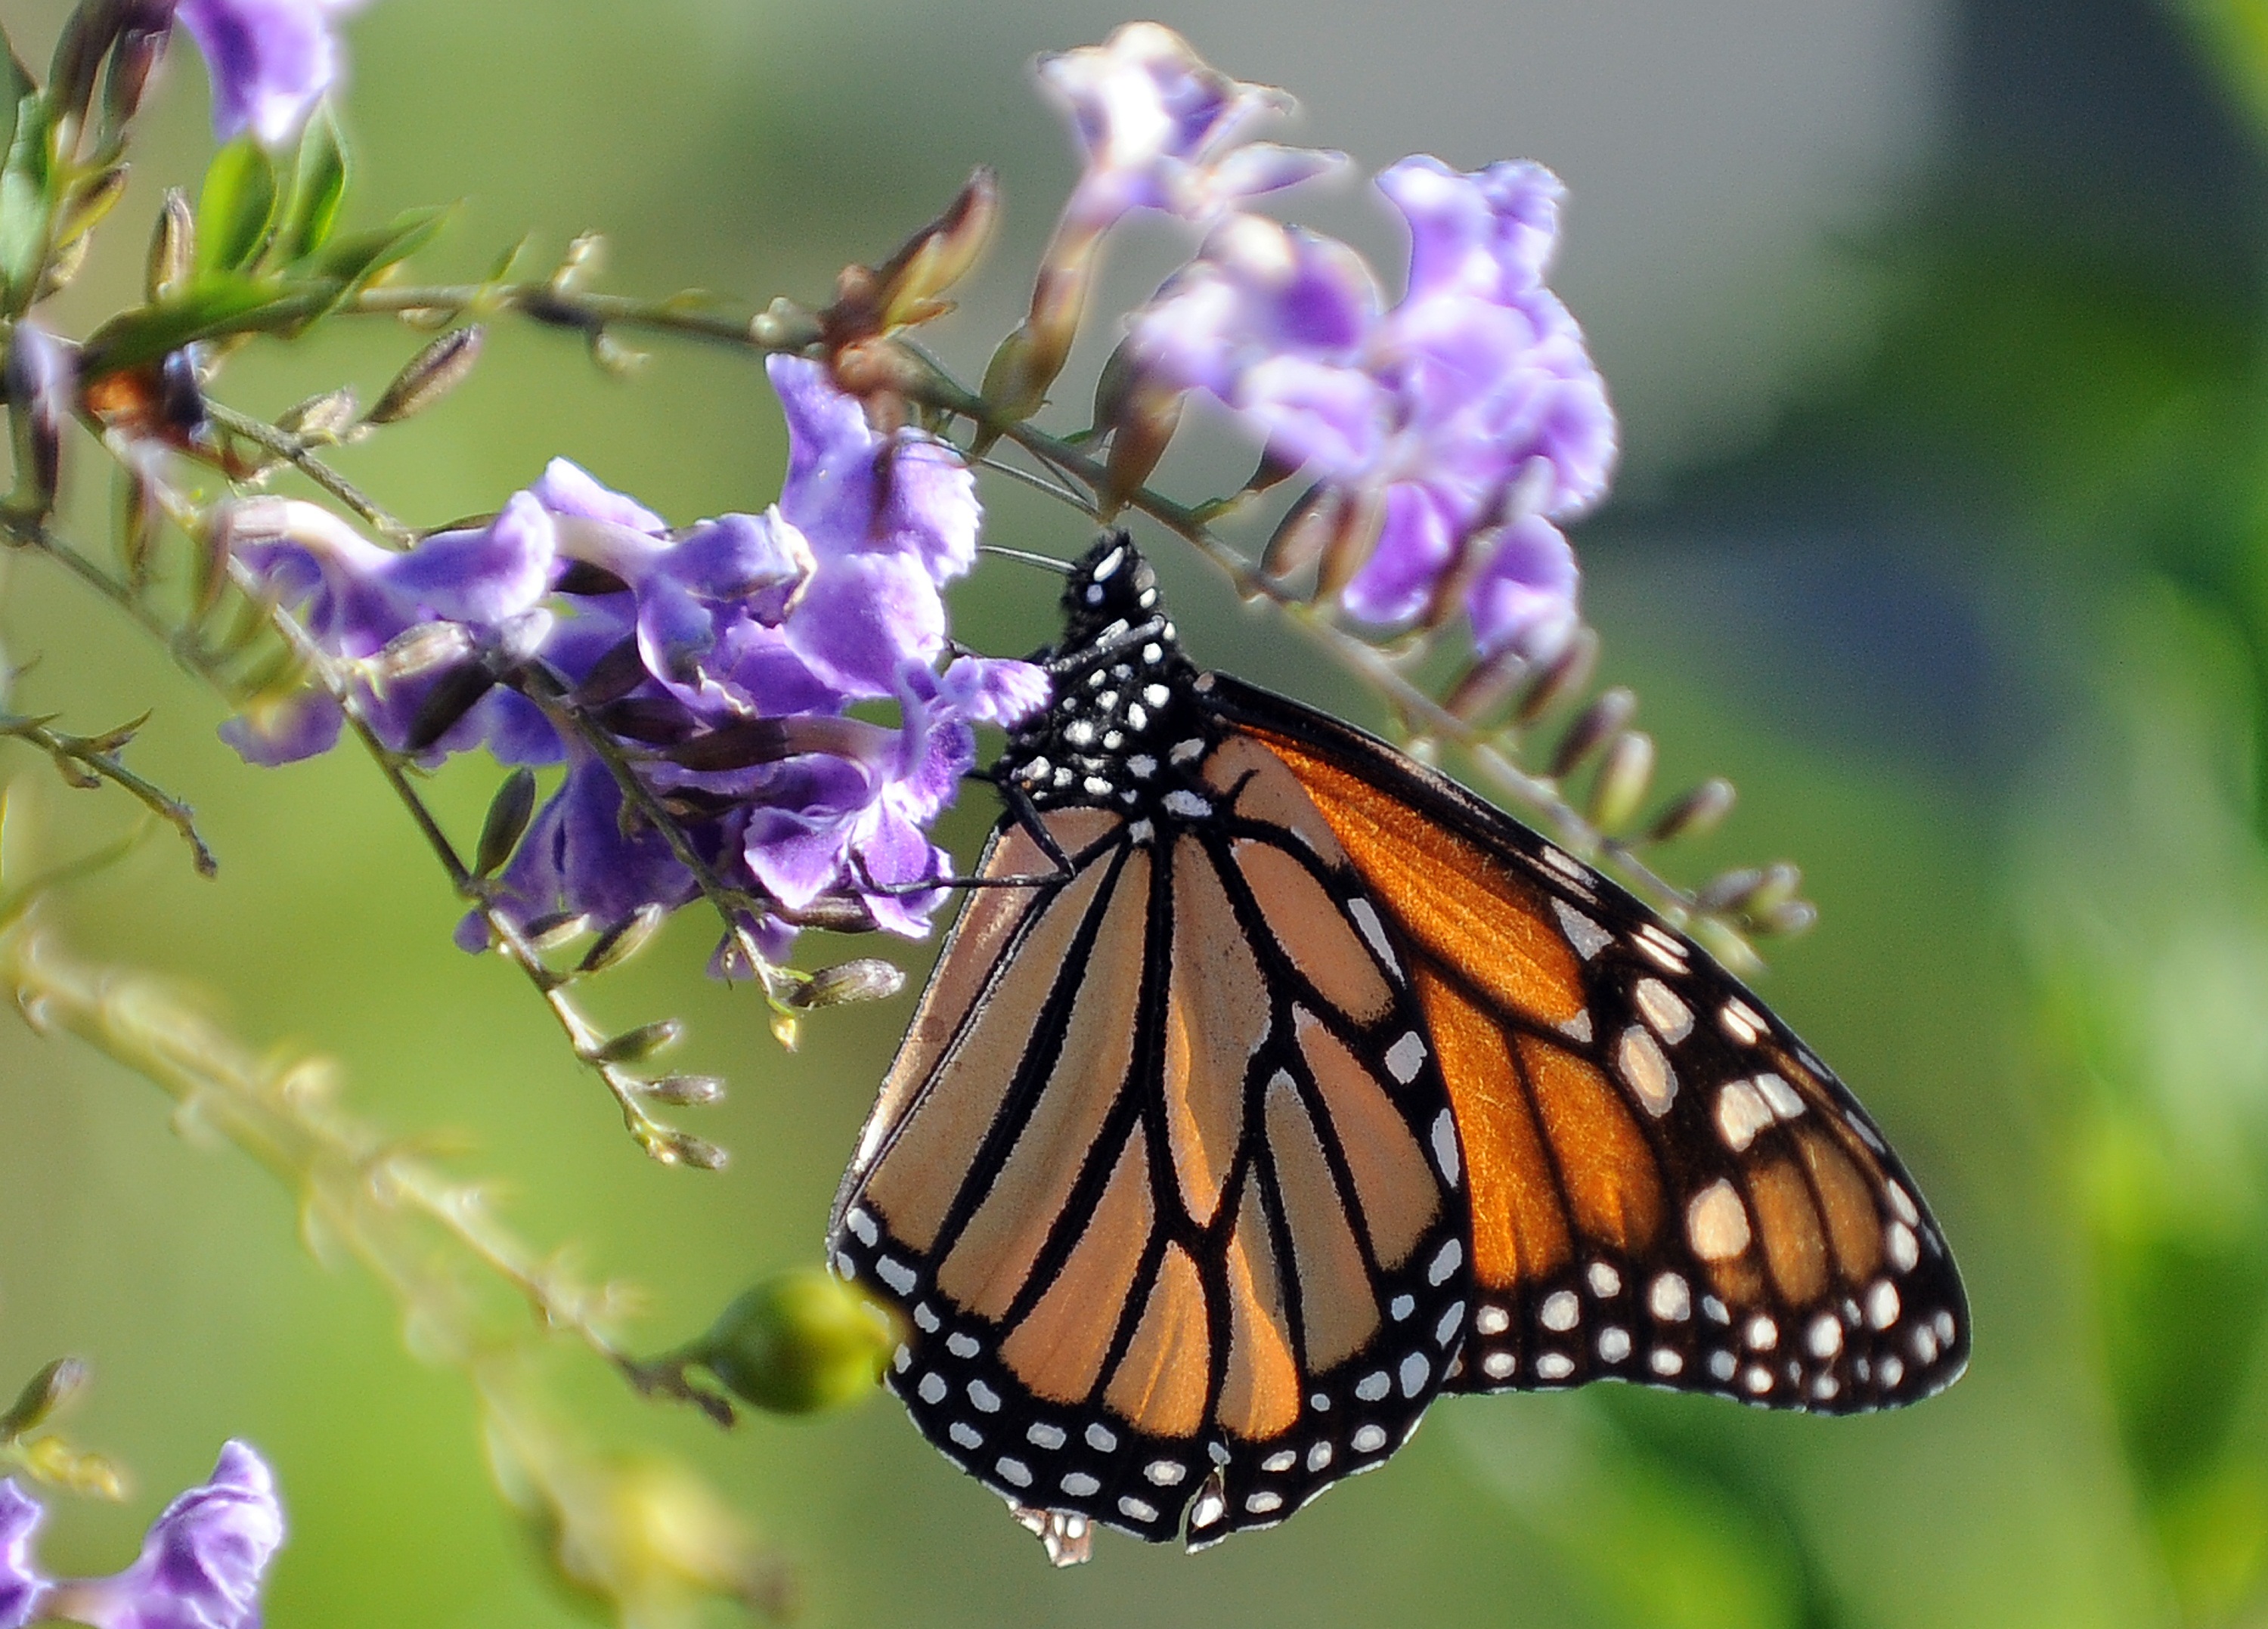 A Monarch butterfly is in a flower in Los Angeles, California on October 28, 2010. The Monarch is famous for its southward migration and northward return in summer in the Americas which spans the life of three to four generations of the butterfly. AFP PHOTO / GABRIEL BOUYS / AFP PHOTO / GABRIEL BOUYS